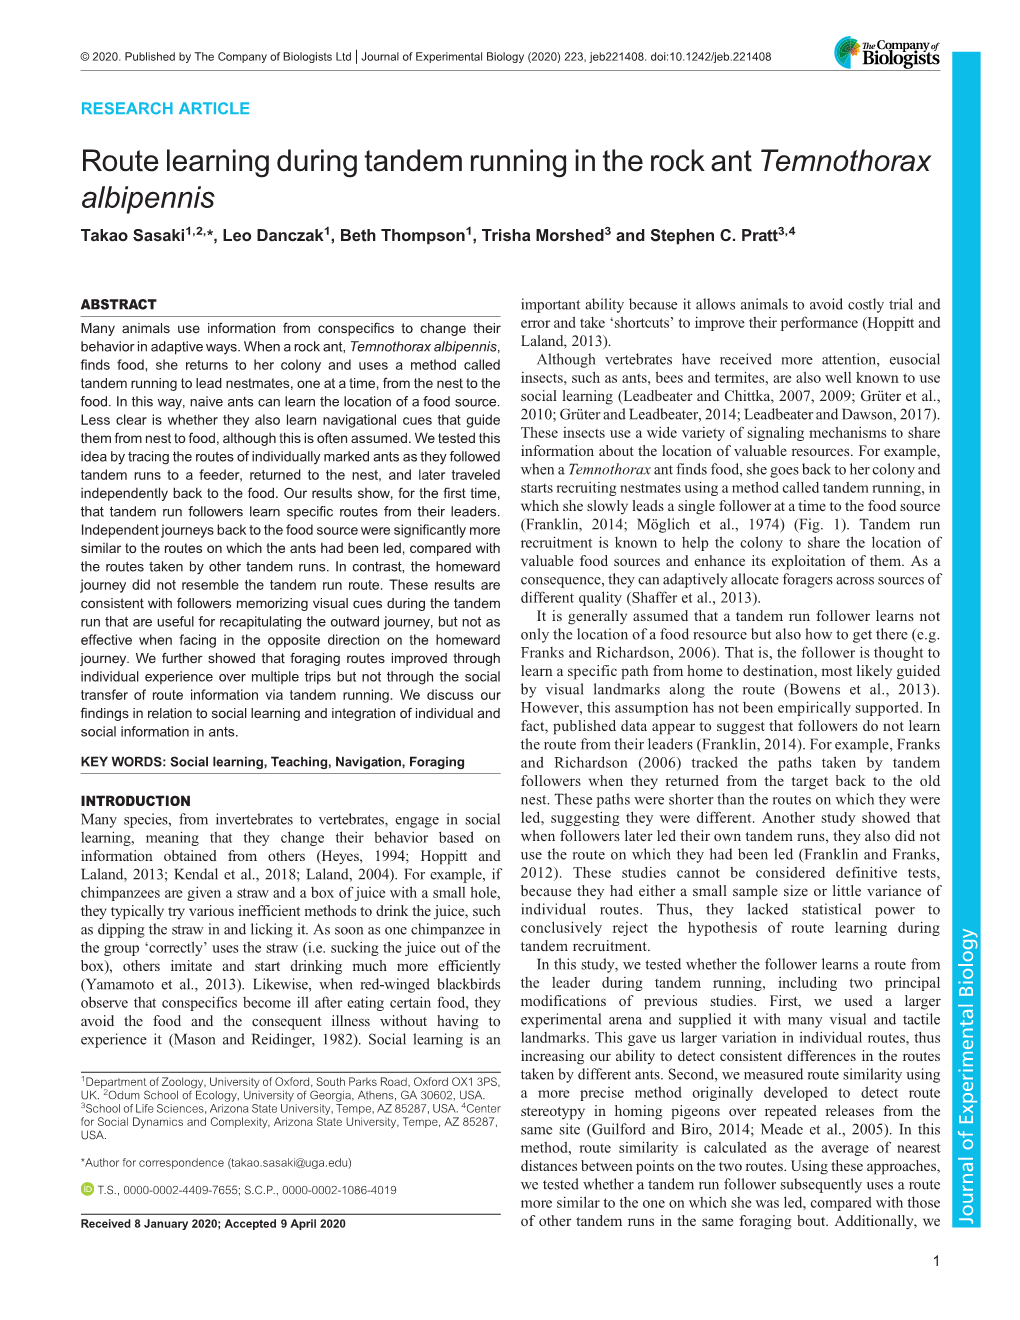 Route Learning During Tandem Running in the Rock Ant Temnothorax Albipennis Takao Sasaki1,2,*, Leo Danczak1, Beth Thompson1, Trisha Morshed3 and Stephen C